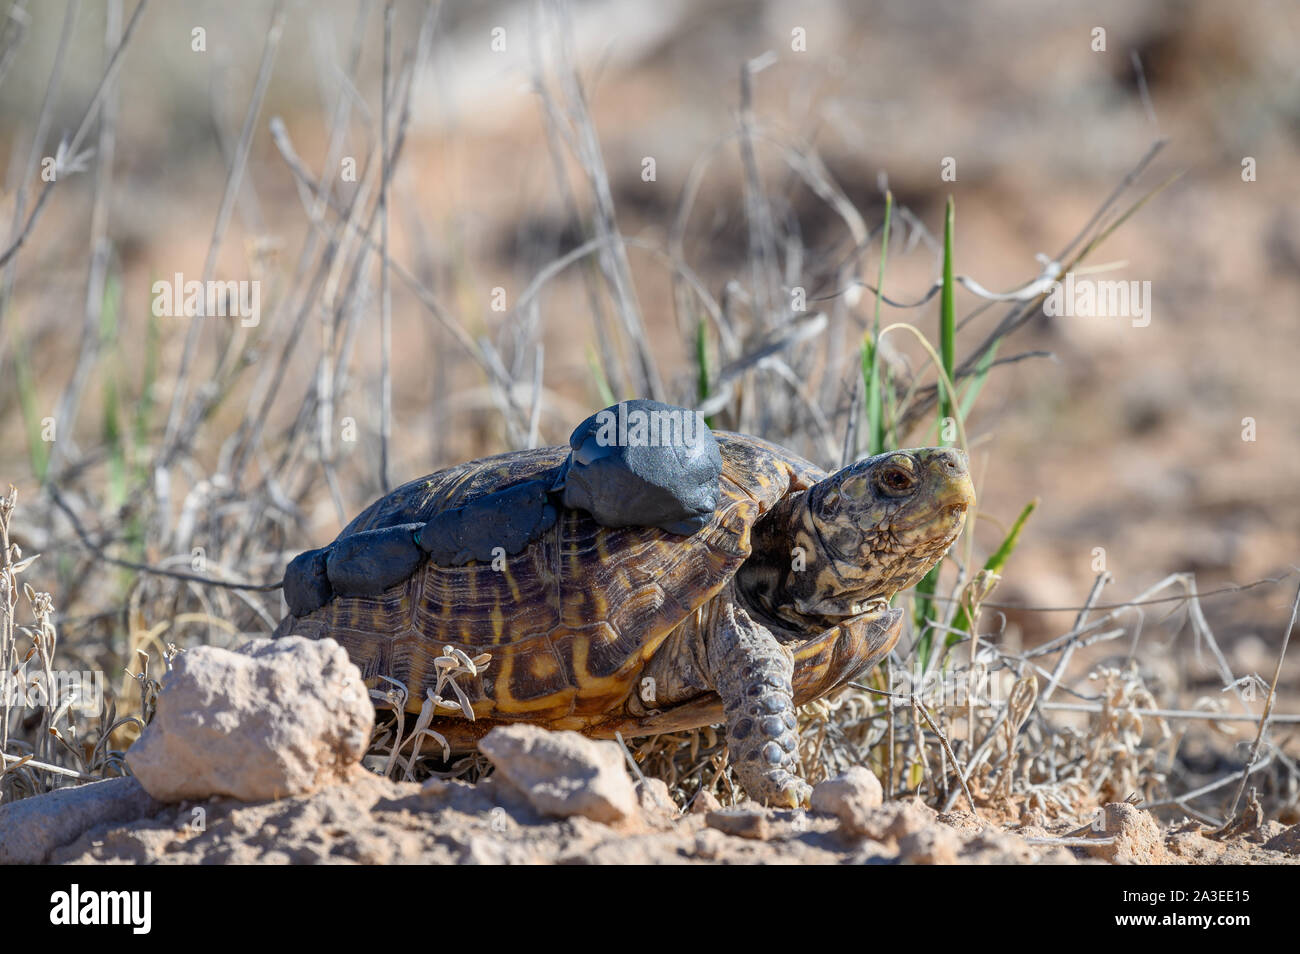 Desert Box Turtle, (Terrapene ornate luteola), being outfitted with a radio transmitter.  Armandaris ranch, SNew Mexico, USA. Stock Photo